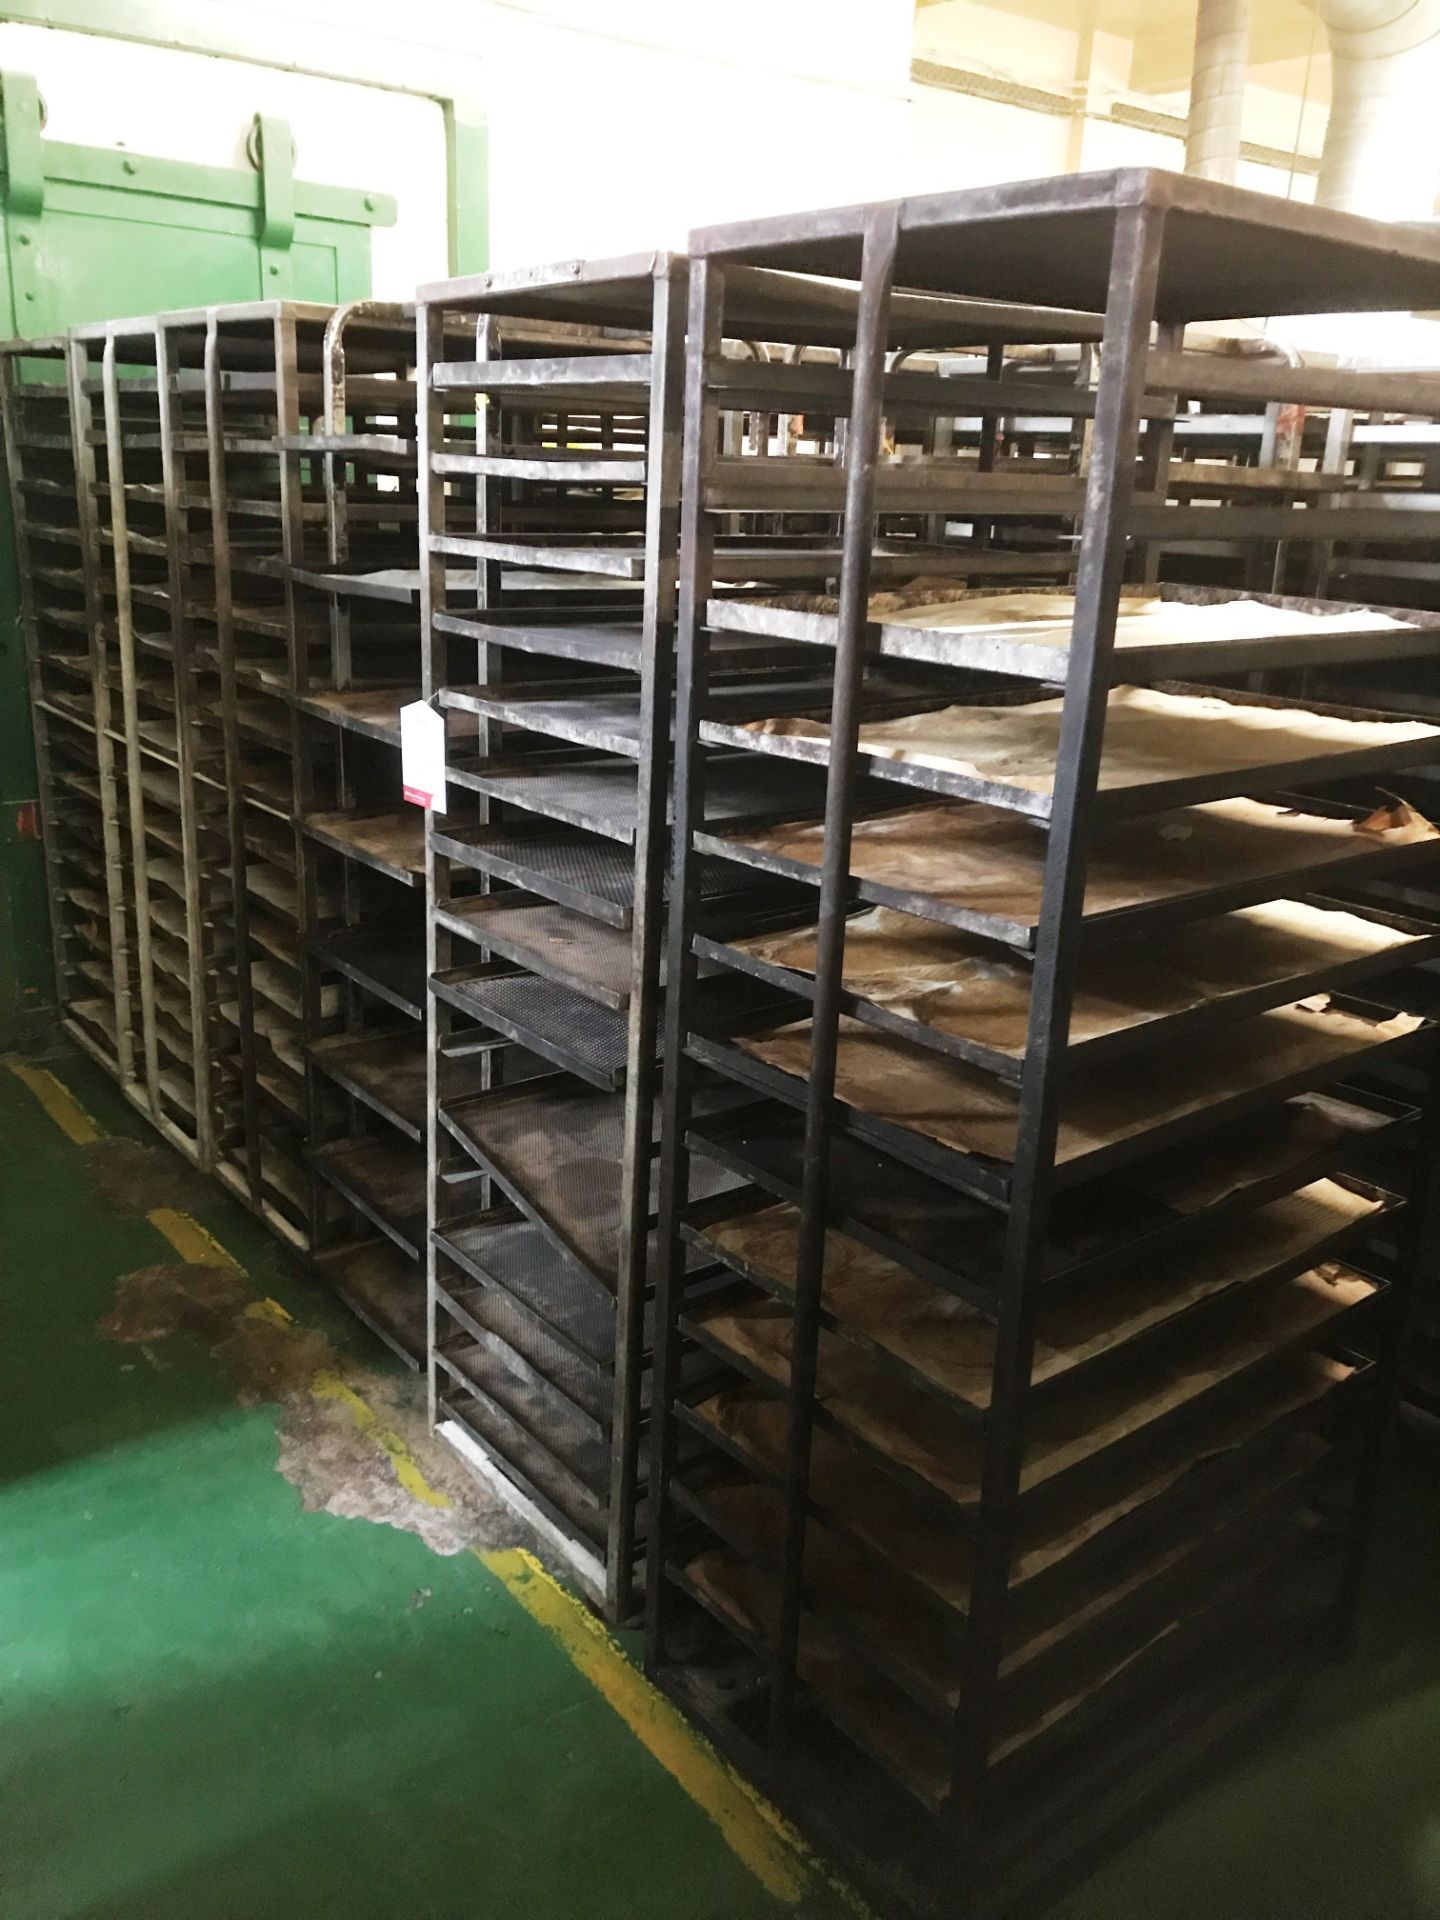 13 x Various Bakery Racks & Trays - As Pictured - Image 2 of 3